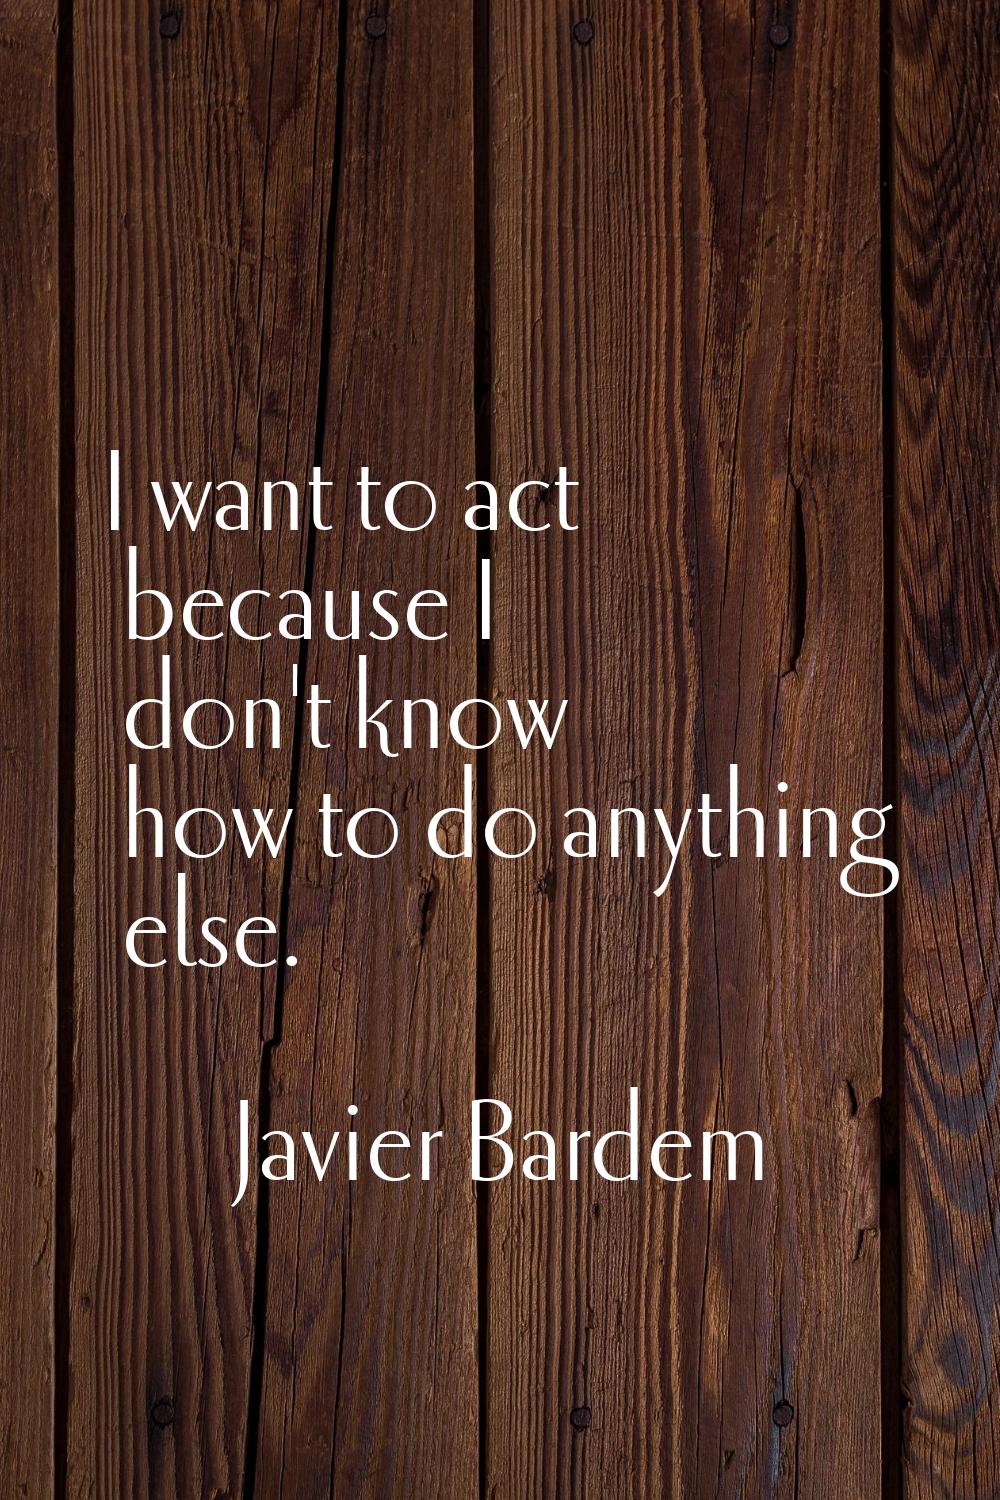 I want to act because I don't know how to do anything else.